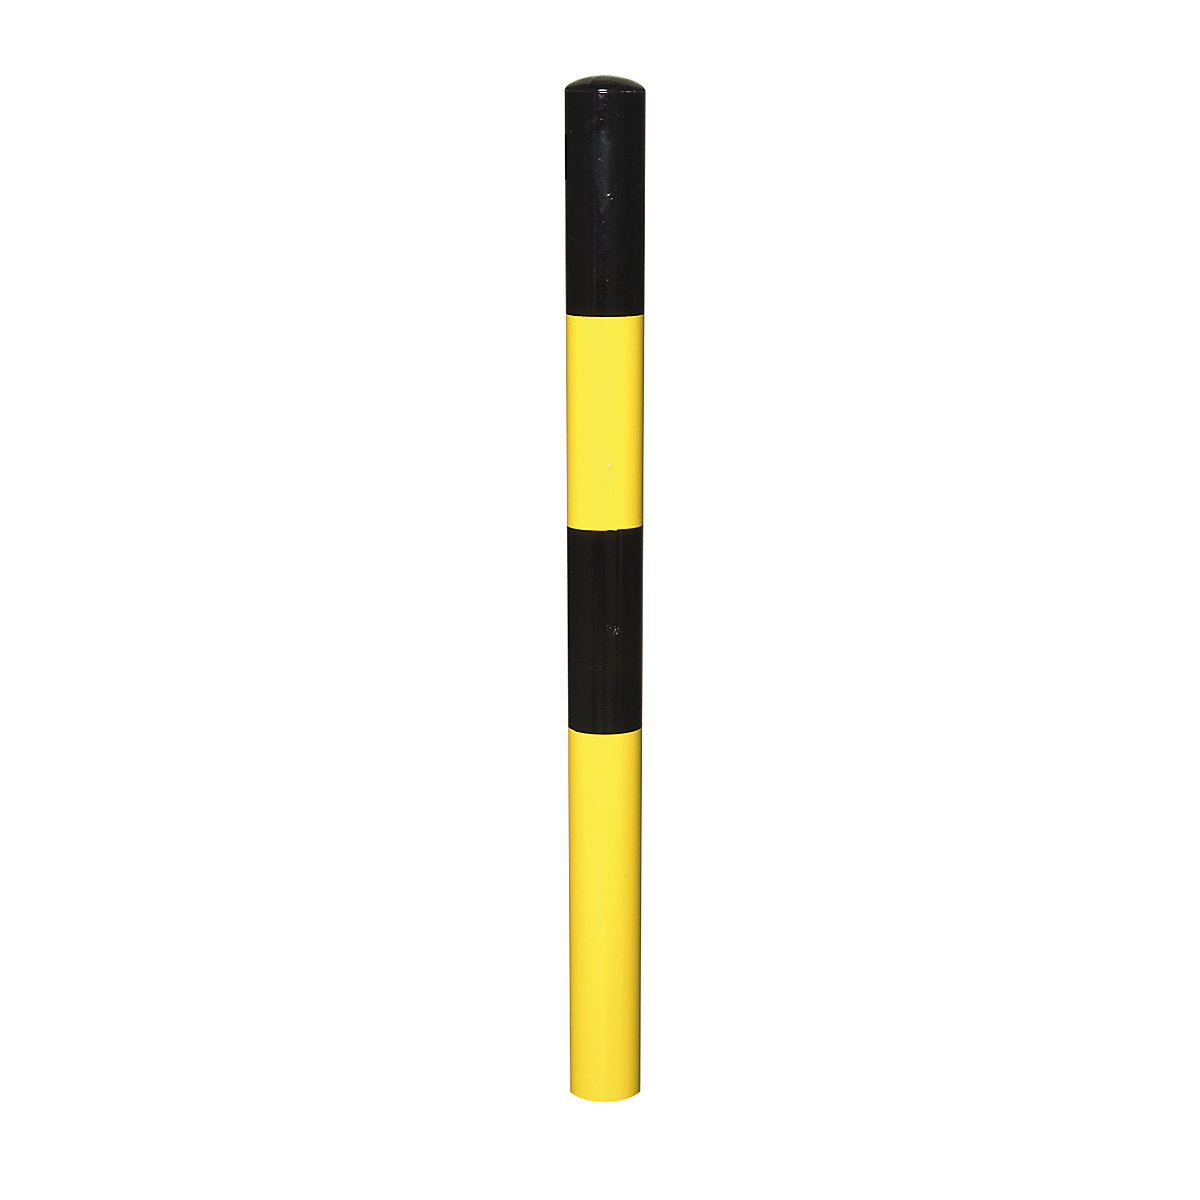 Barrier post, for setting in concrete, Ø 76 mm, painted black/yellow, 2 eyelets-9